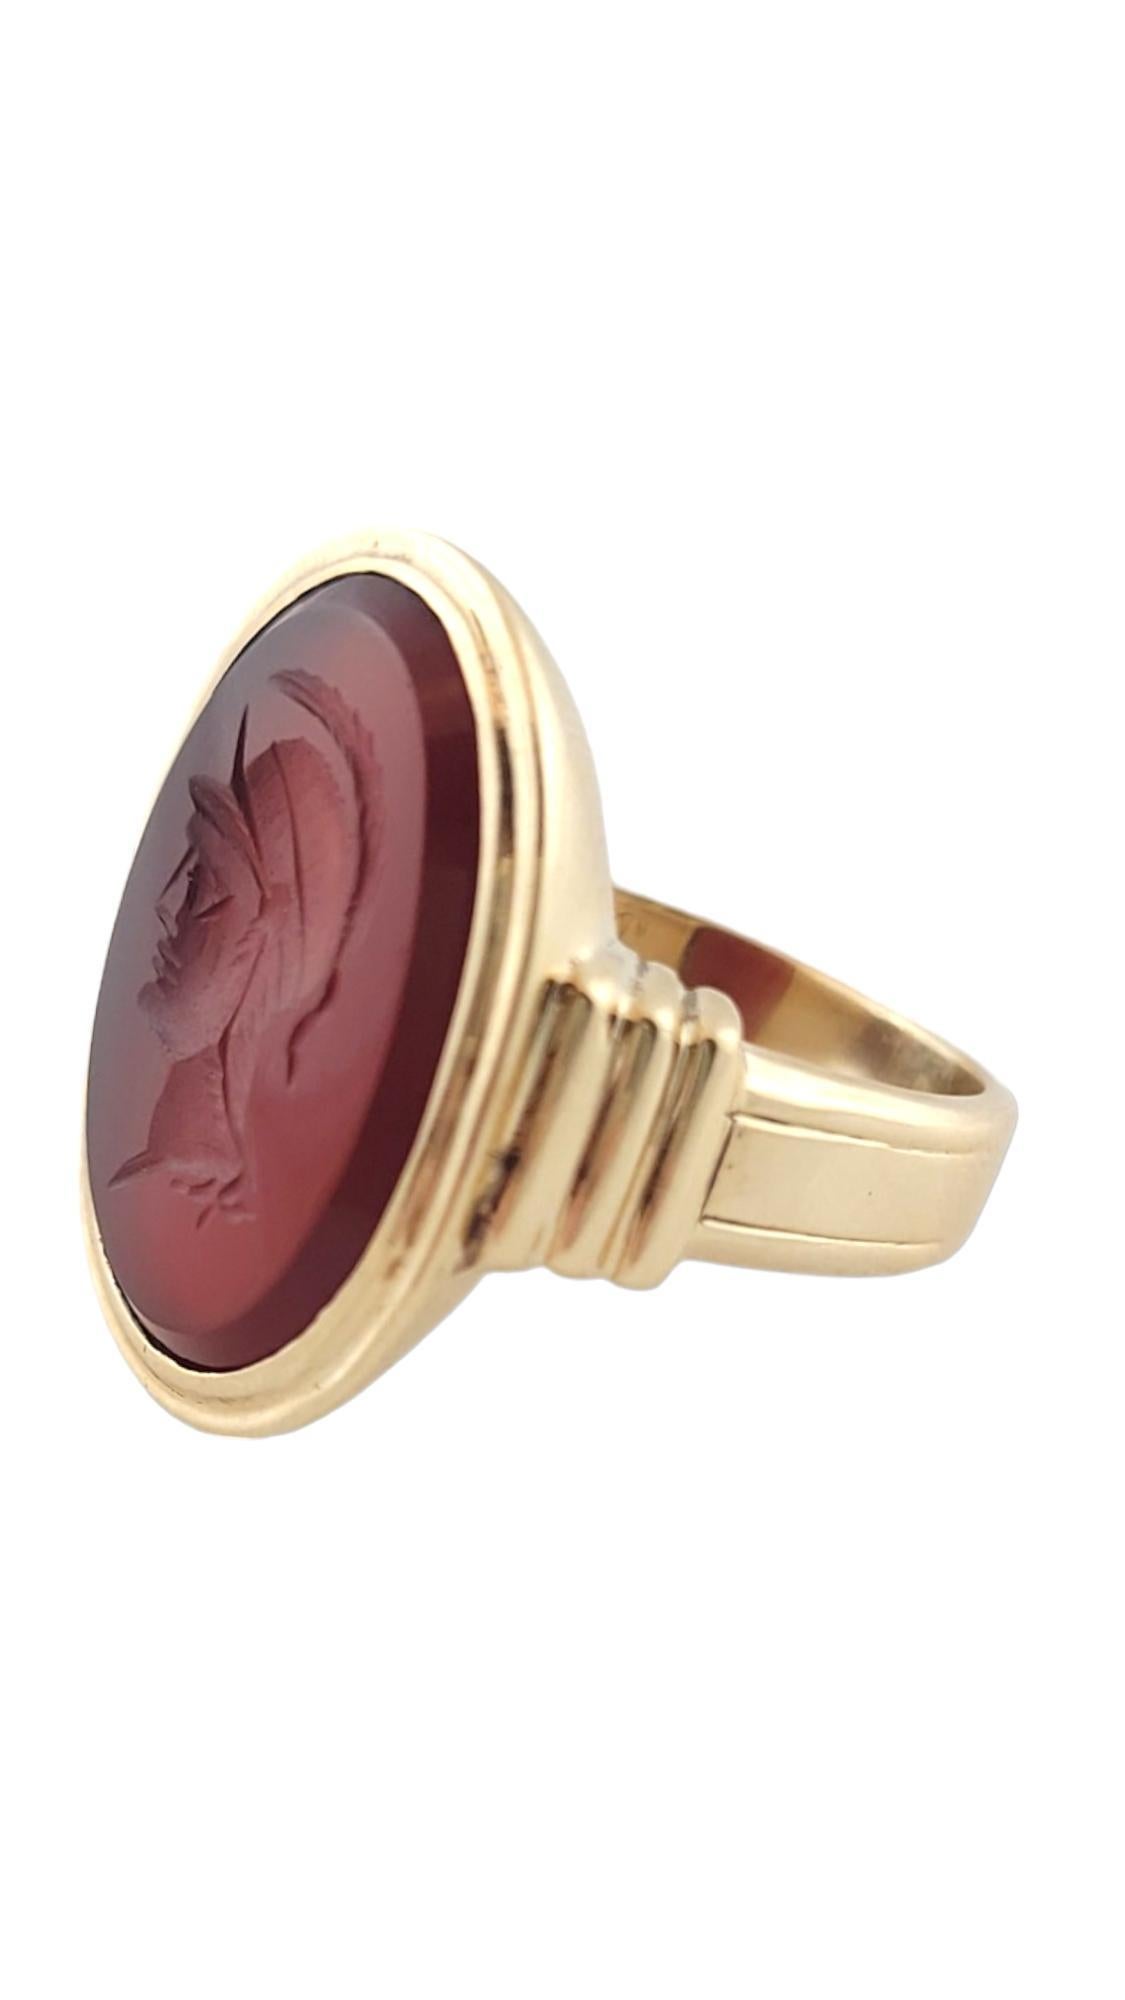 Vintage 10K Yellow Gold Carnelian roman Soldier Head ring size 7.5

This gorgeous ring features a roman soldier head etched into a beautiful carnelian stone set in 10K yellow gold!

Ring size: 7.5
Shank: 3.98mm
Front: 22.82mm X 7.76mm X